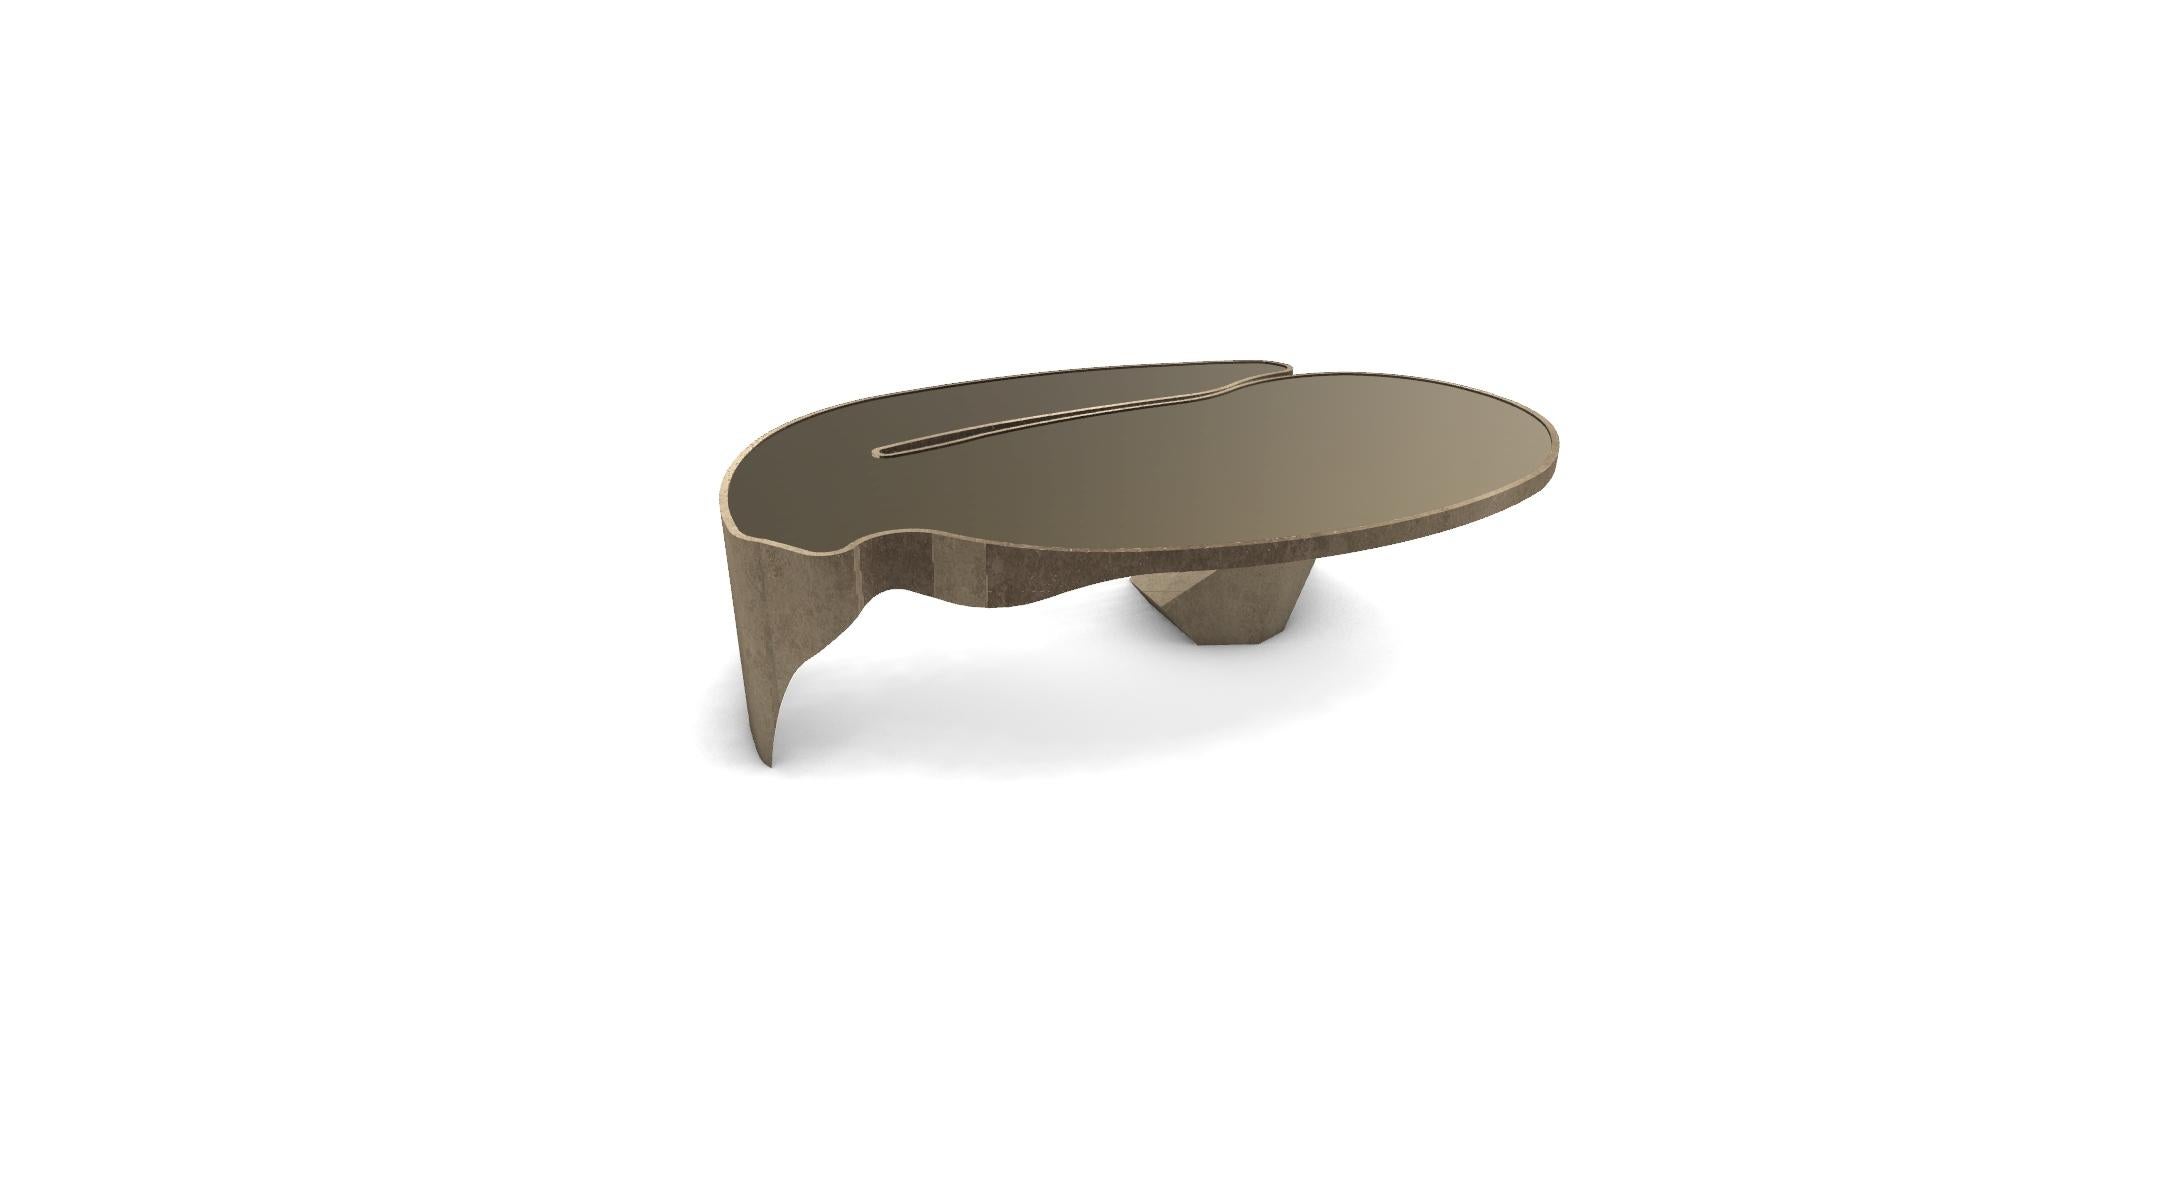 Gulla Jonsdottir
Crater Table, 2022
Burnished brass and marble
14 x 39 x 29 in
Edition of 12